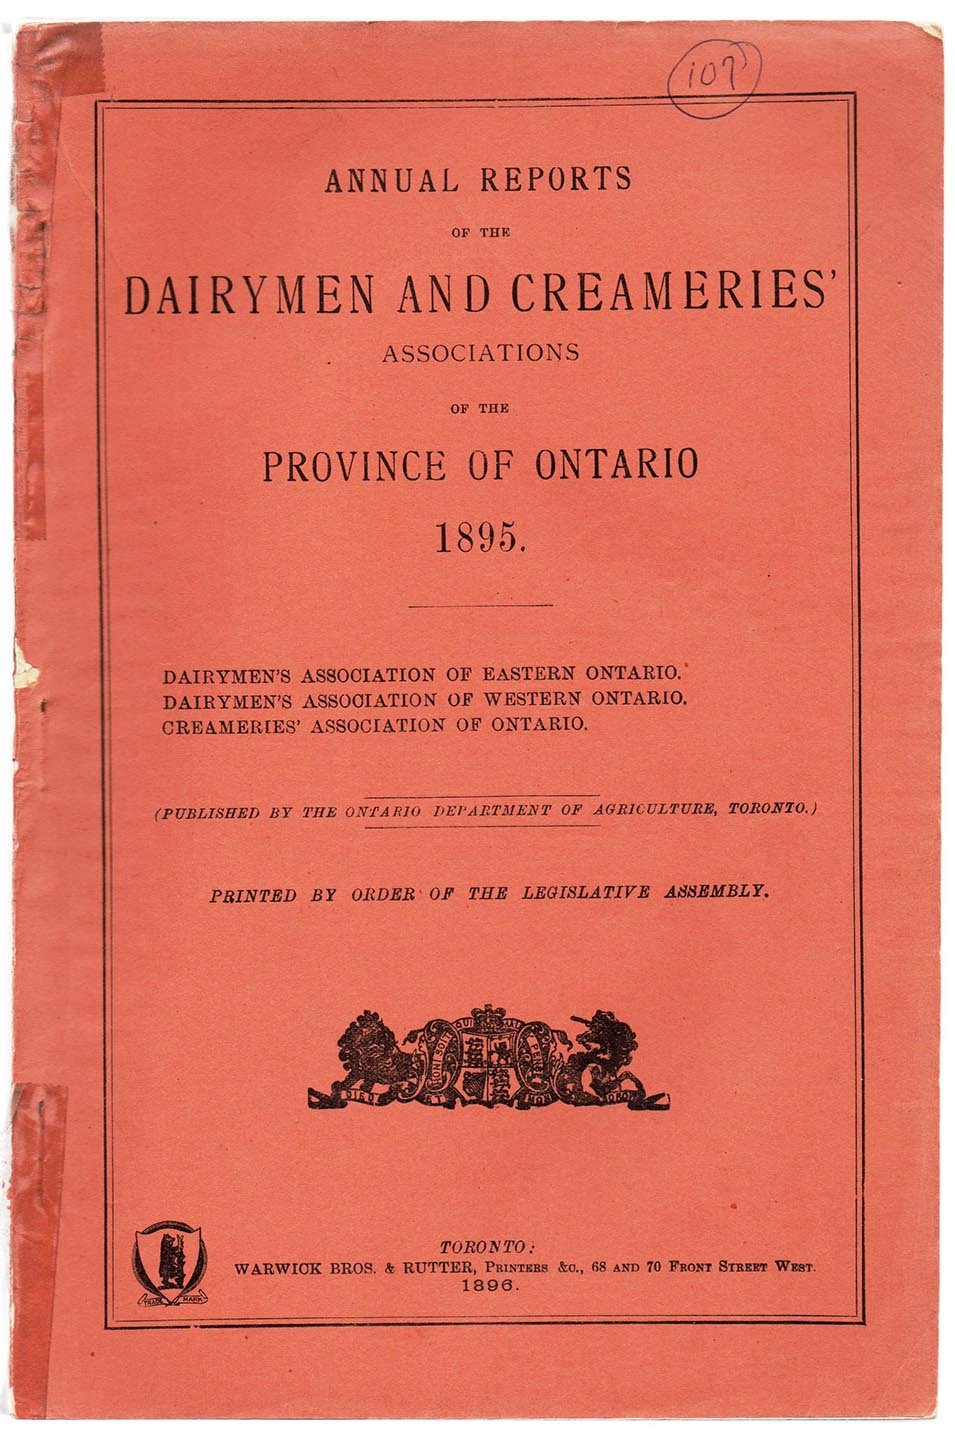 Annual Reports of the Dairymen and Creameries' Associations of the Province of Ontario 1895